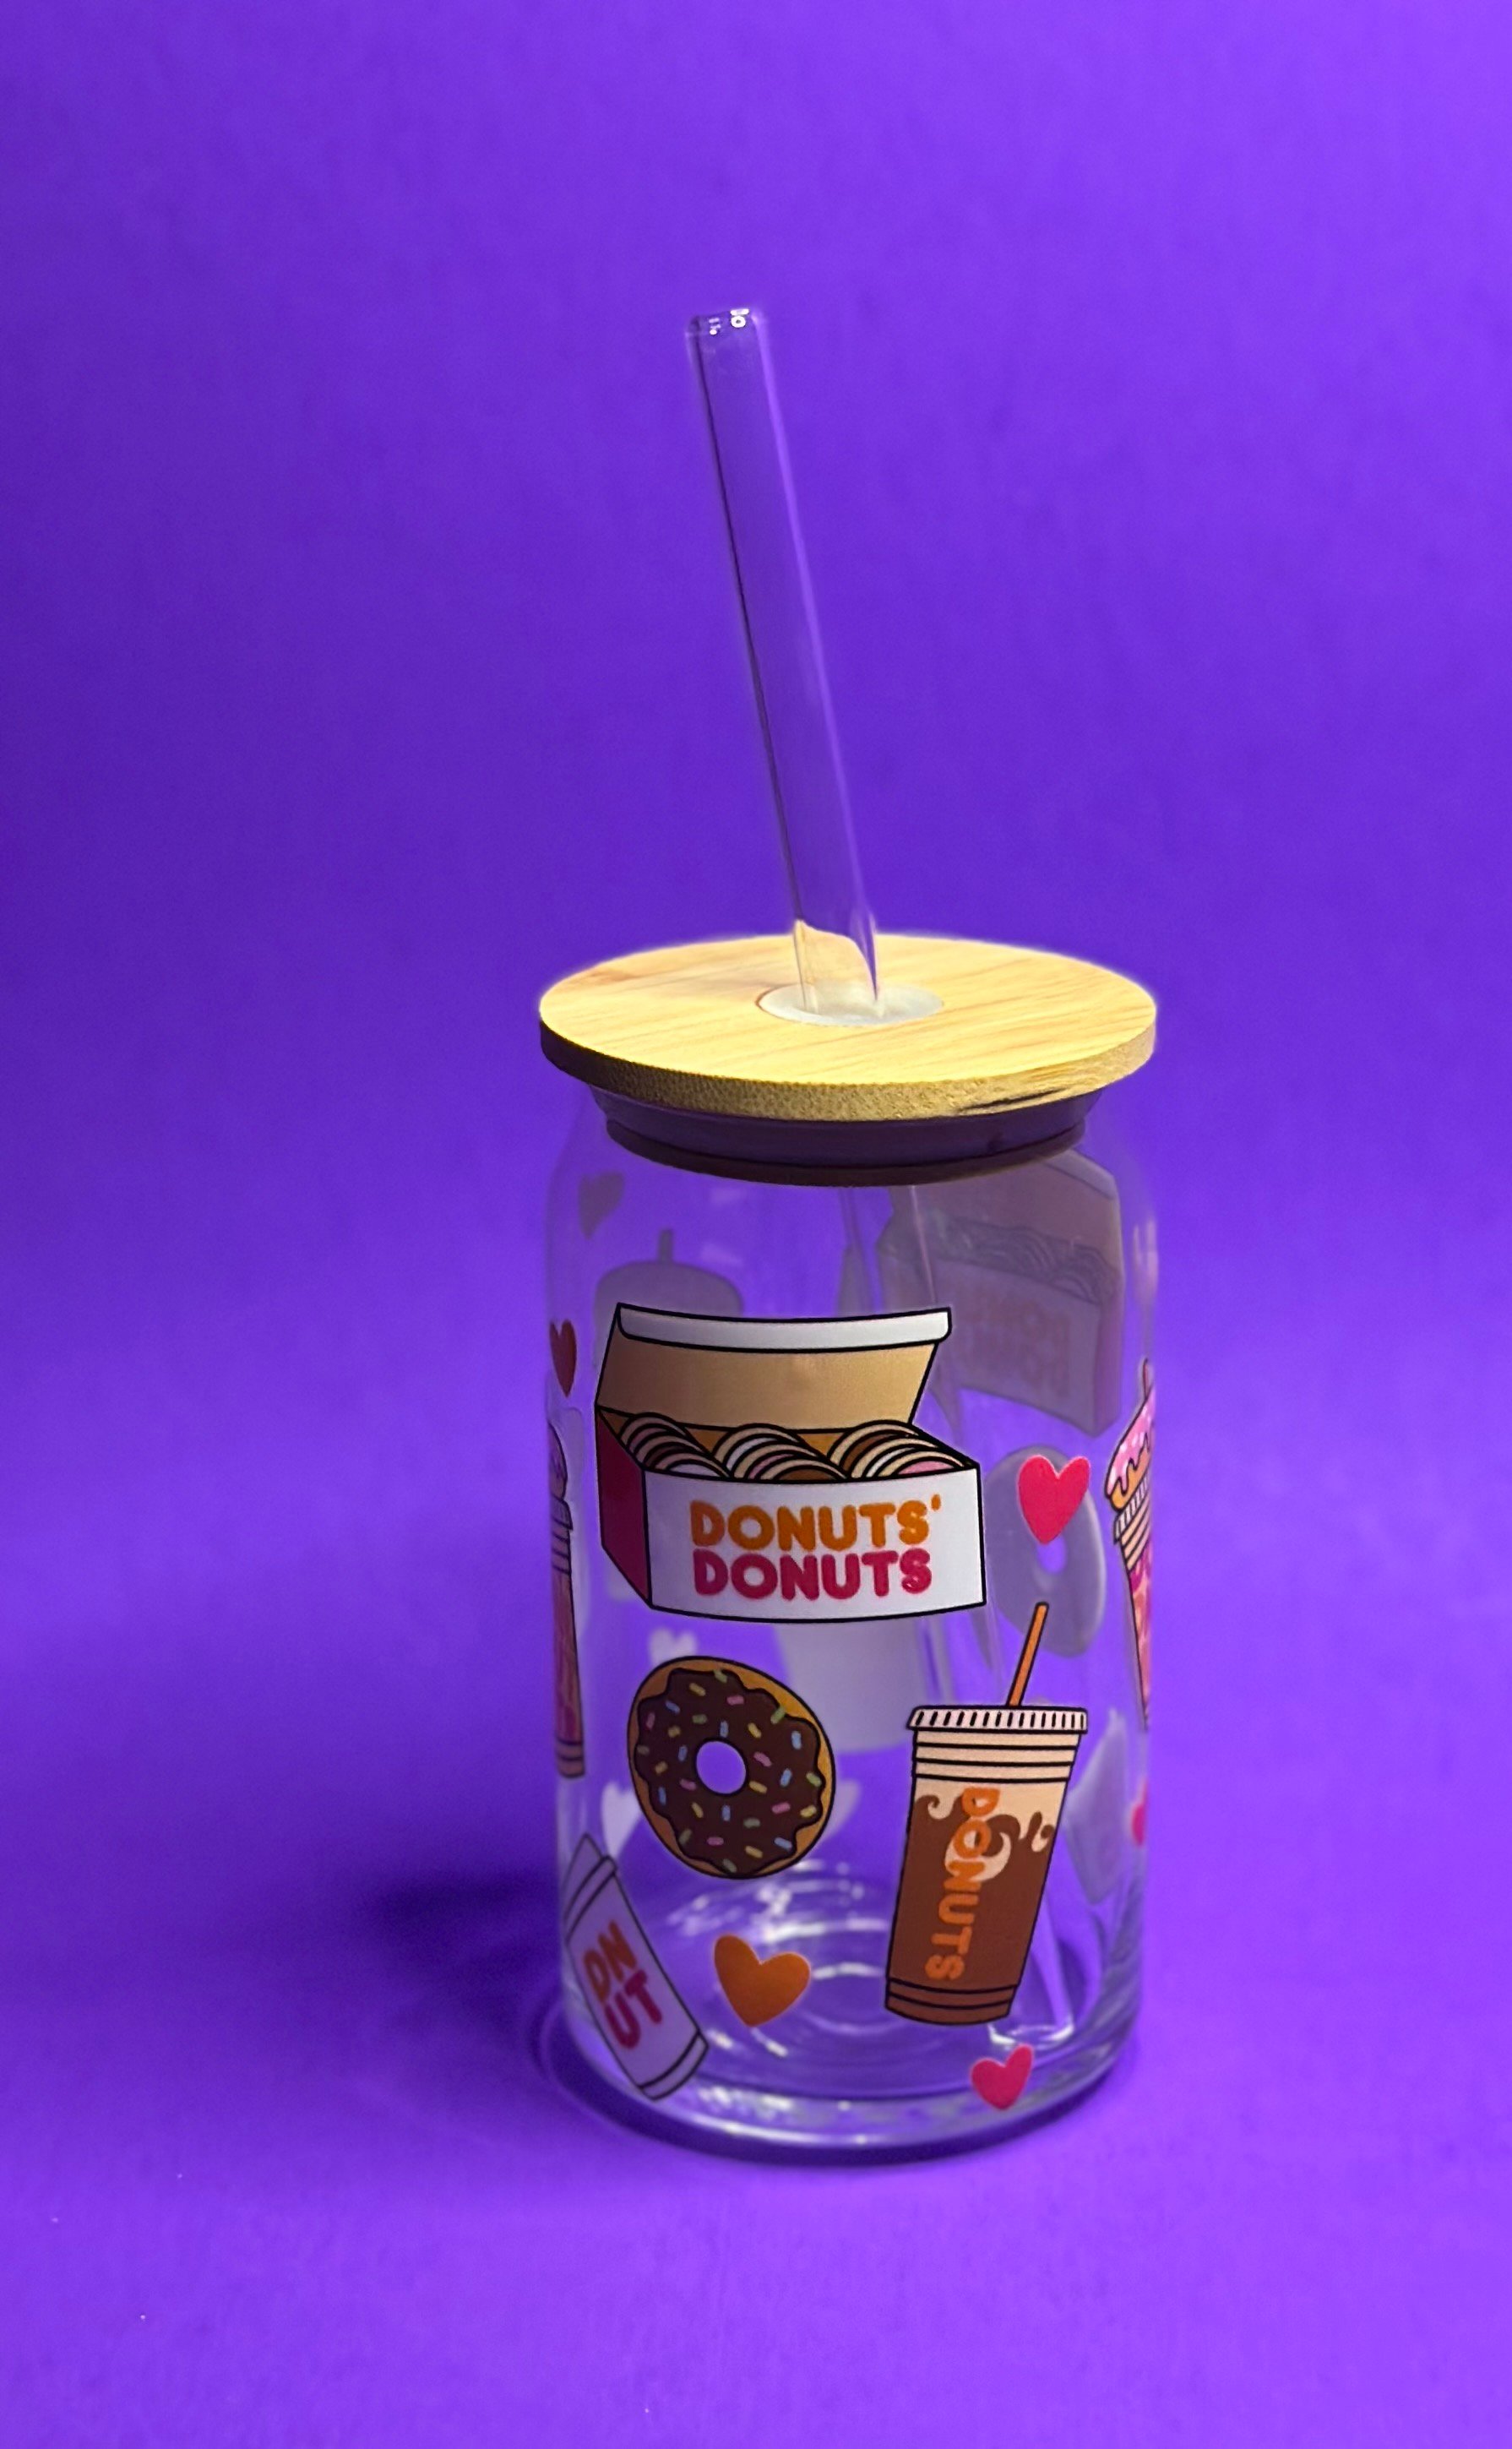 https://assets.bigcartel.com/product_images/889b55b7-a223-4a9e-b0a3-6a5f6e1b3ca9/16-oz-dunkin-donuts-libbey-glass-cup.jpg?auto=format&fit=max&w=2000